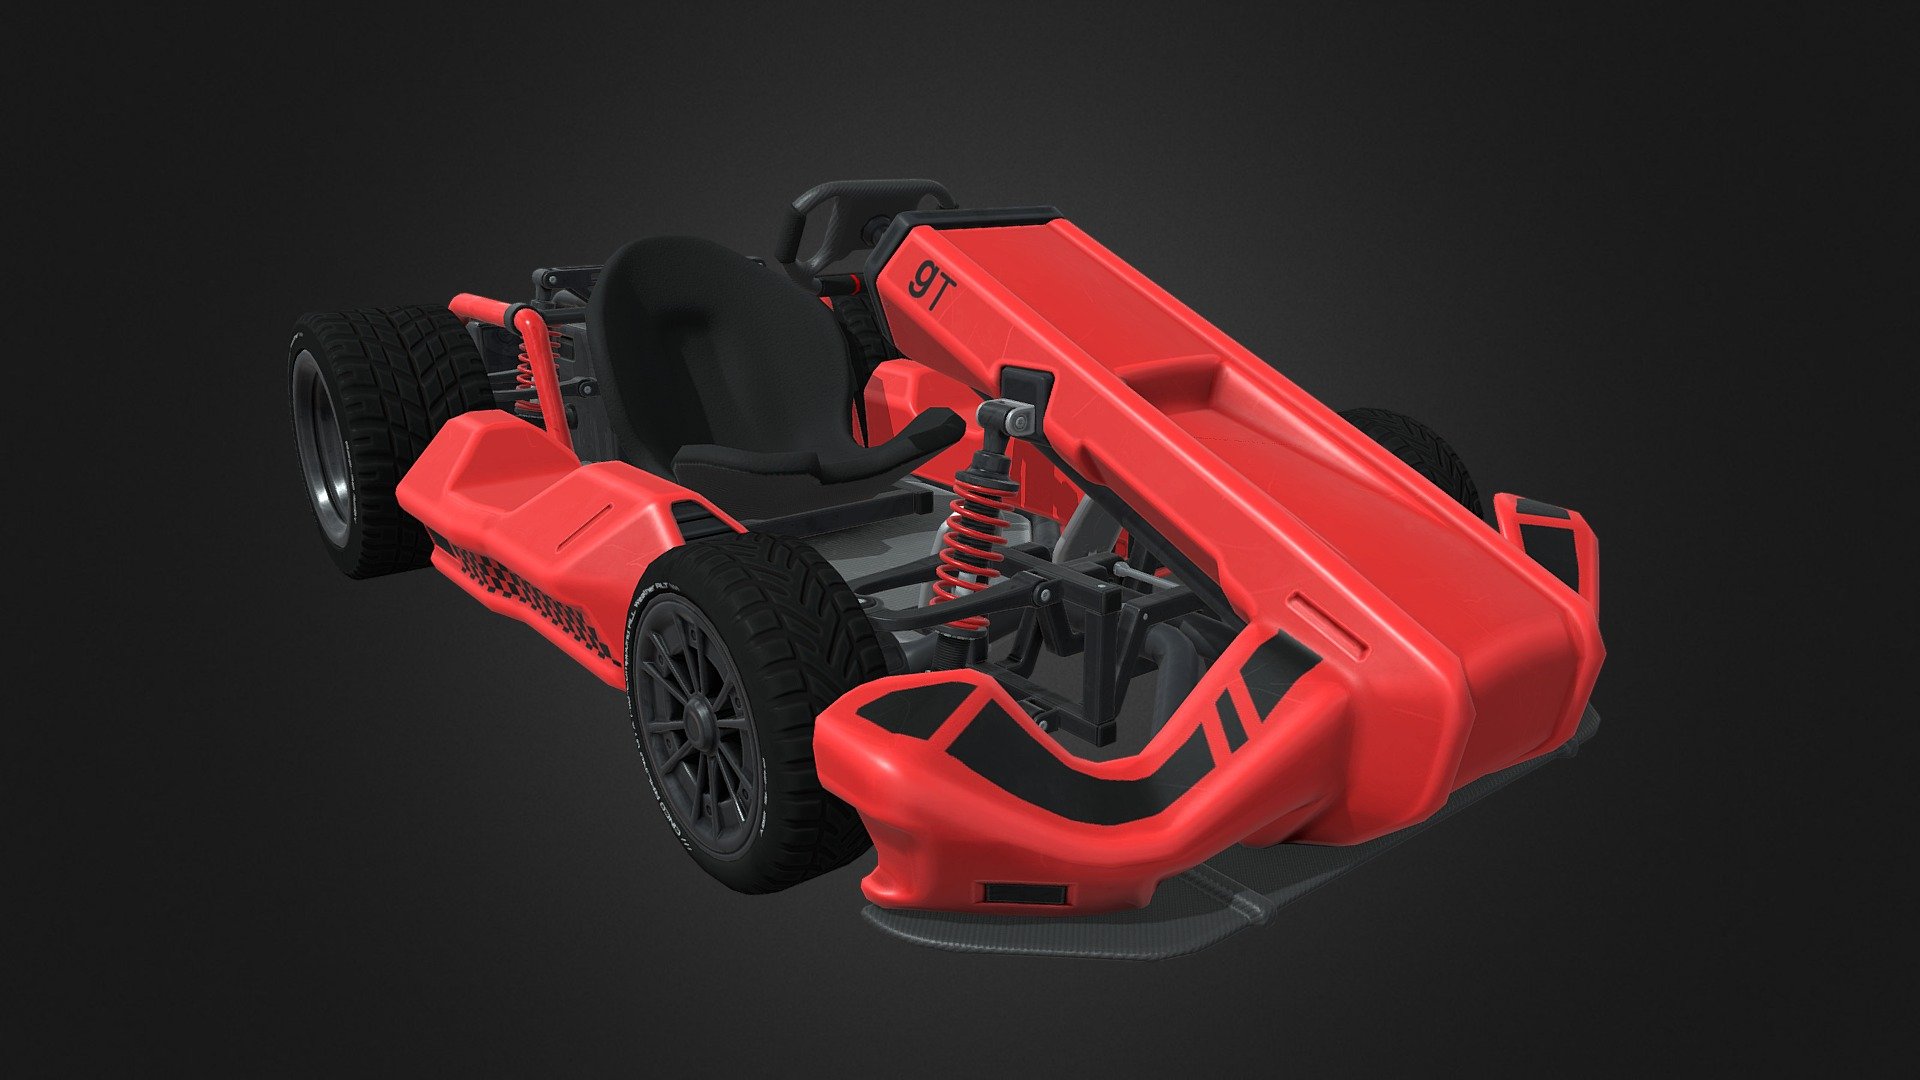 A drivable go-kart vehicle made specifically for the Source game Garrysmod!
Available as a Workshop addon, and fully functional! Ingame, it is fully animated and has a colour mask, so it can be tinted to any colour. 
It also comes with a Bodygroup of a Glider, that will be utilized in an upcoming Kart racing gamemode.

This model was Commissioned for a Gmod gamemode that will be released in the future!

By importing a default gmod character model, and applying the &ldquo;driving